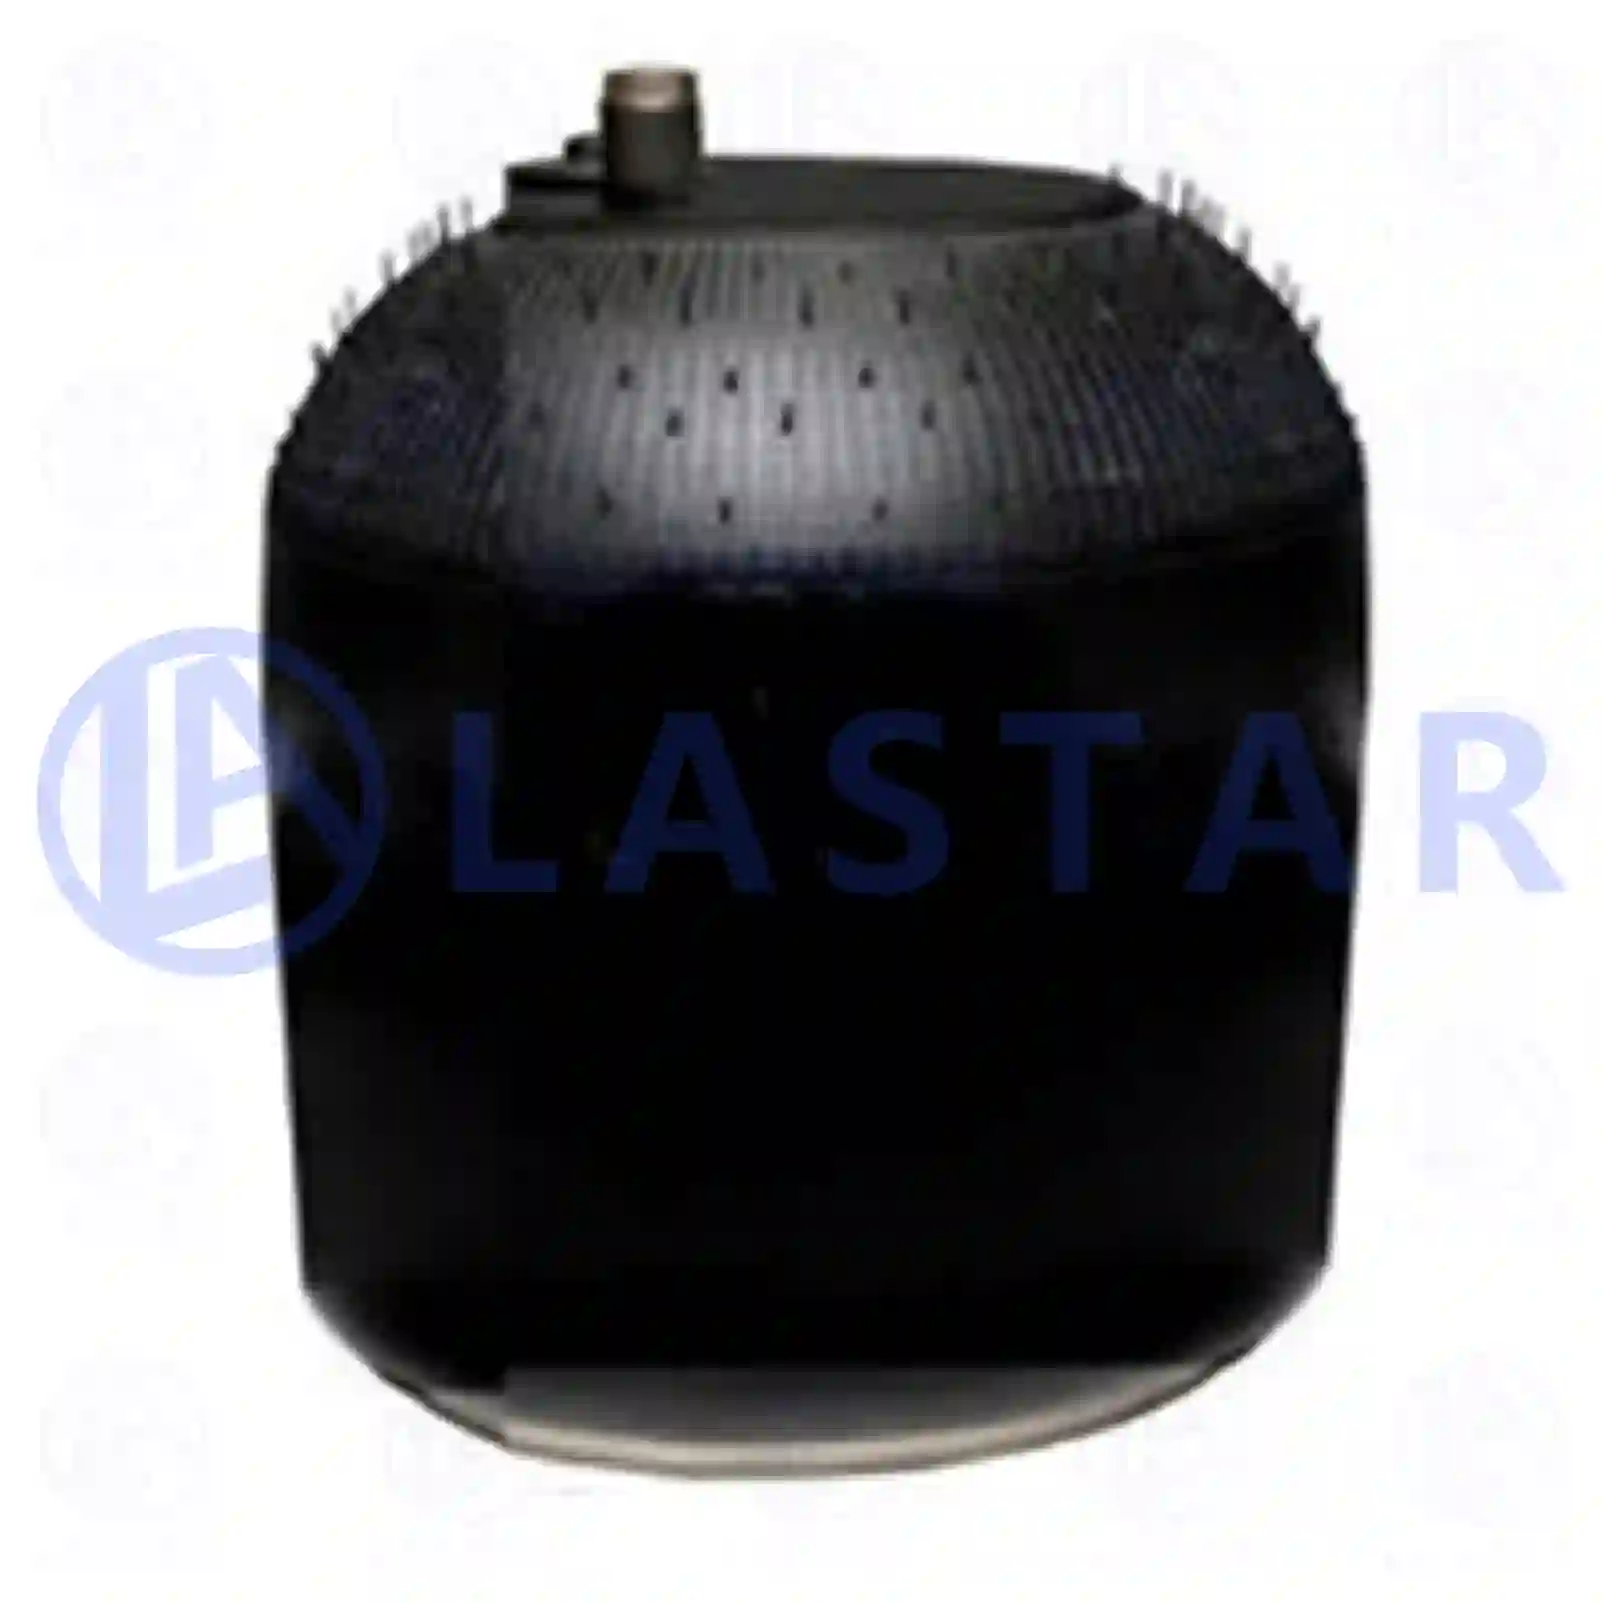 Air spring, with steel piston, 77727205, 9423203721 ||  77727205 Lastar Spare Part | Truck Spare Parts, Auotomotive Spare Parts Air spring, with steel piston, 77727205, 9423203721 ||  77727205 Lastar Spare Part | Truck Spare Parts, Auotomotive Spare Parts